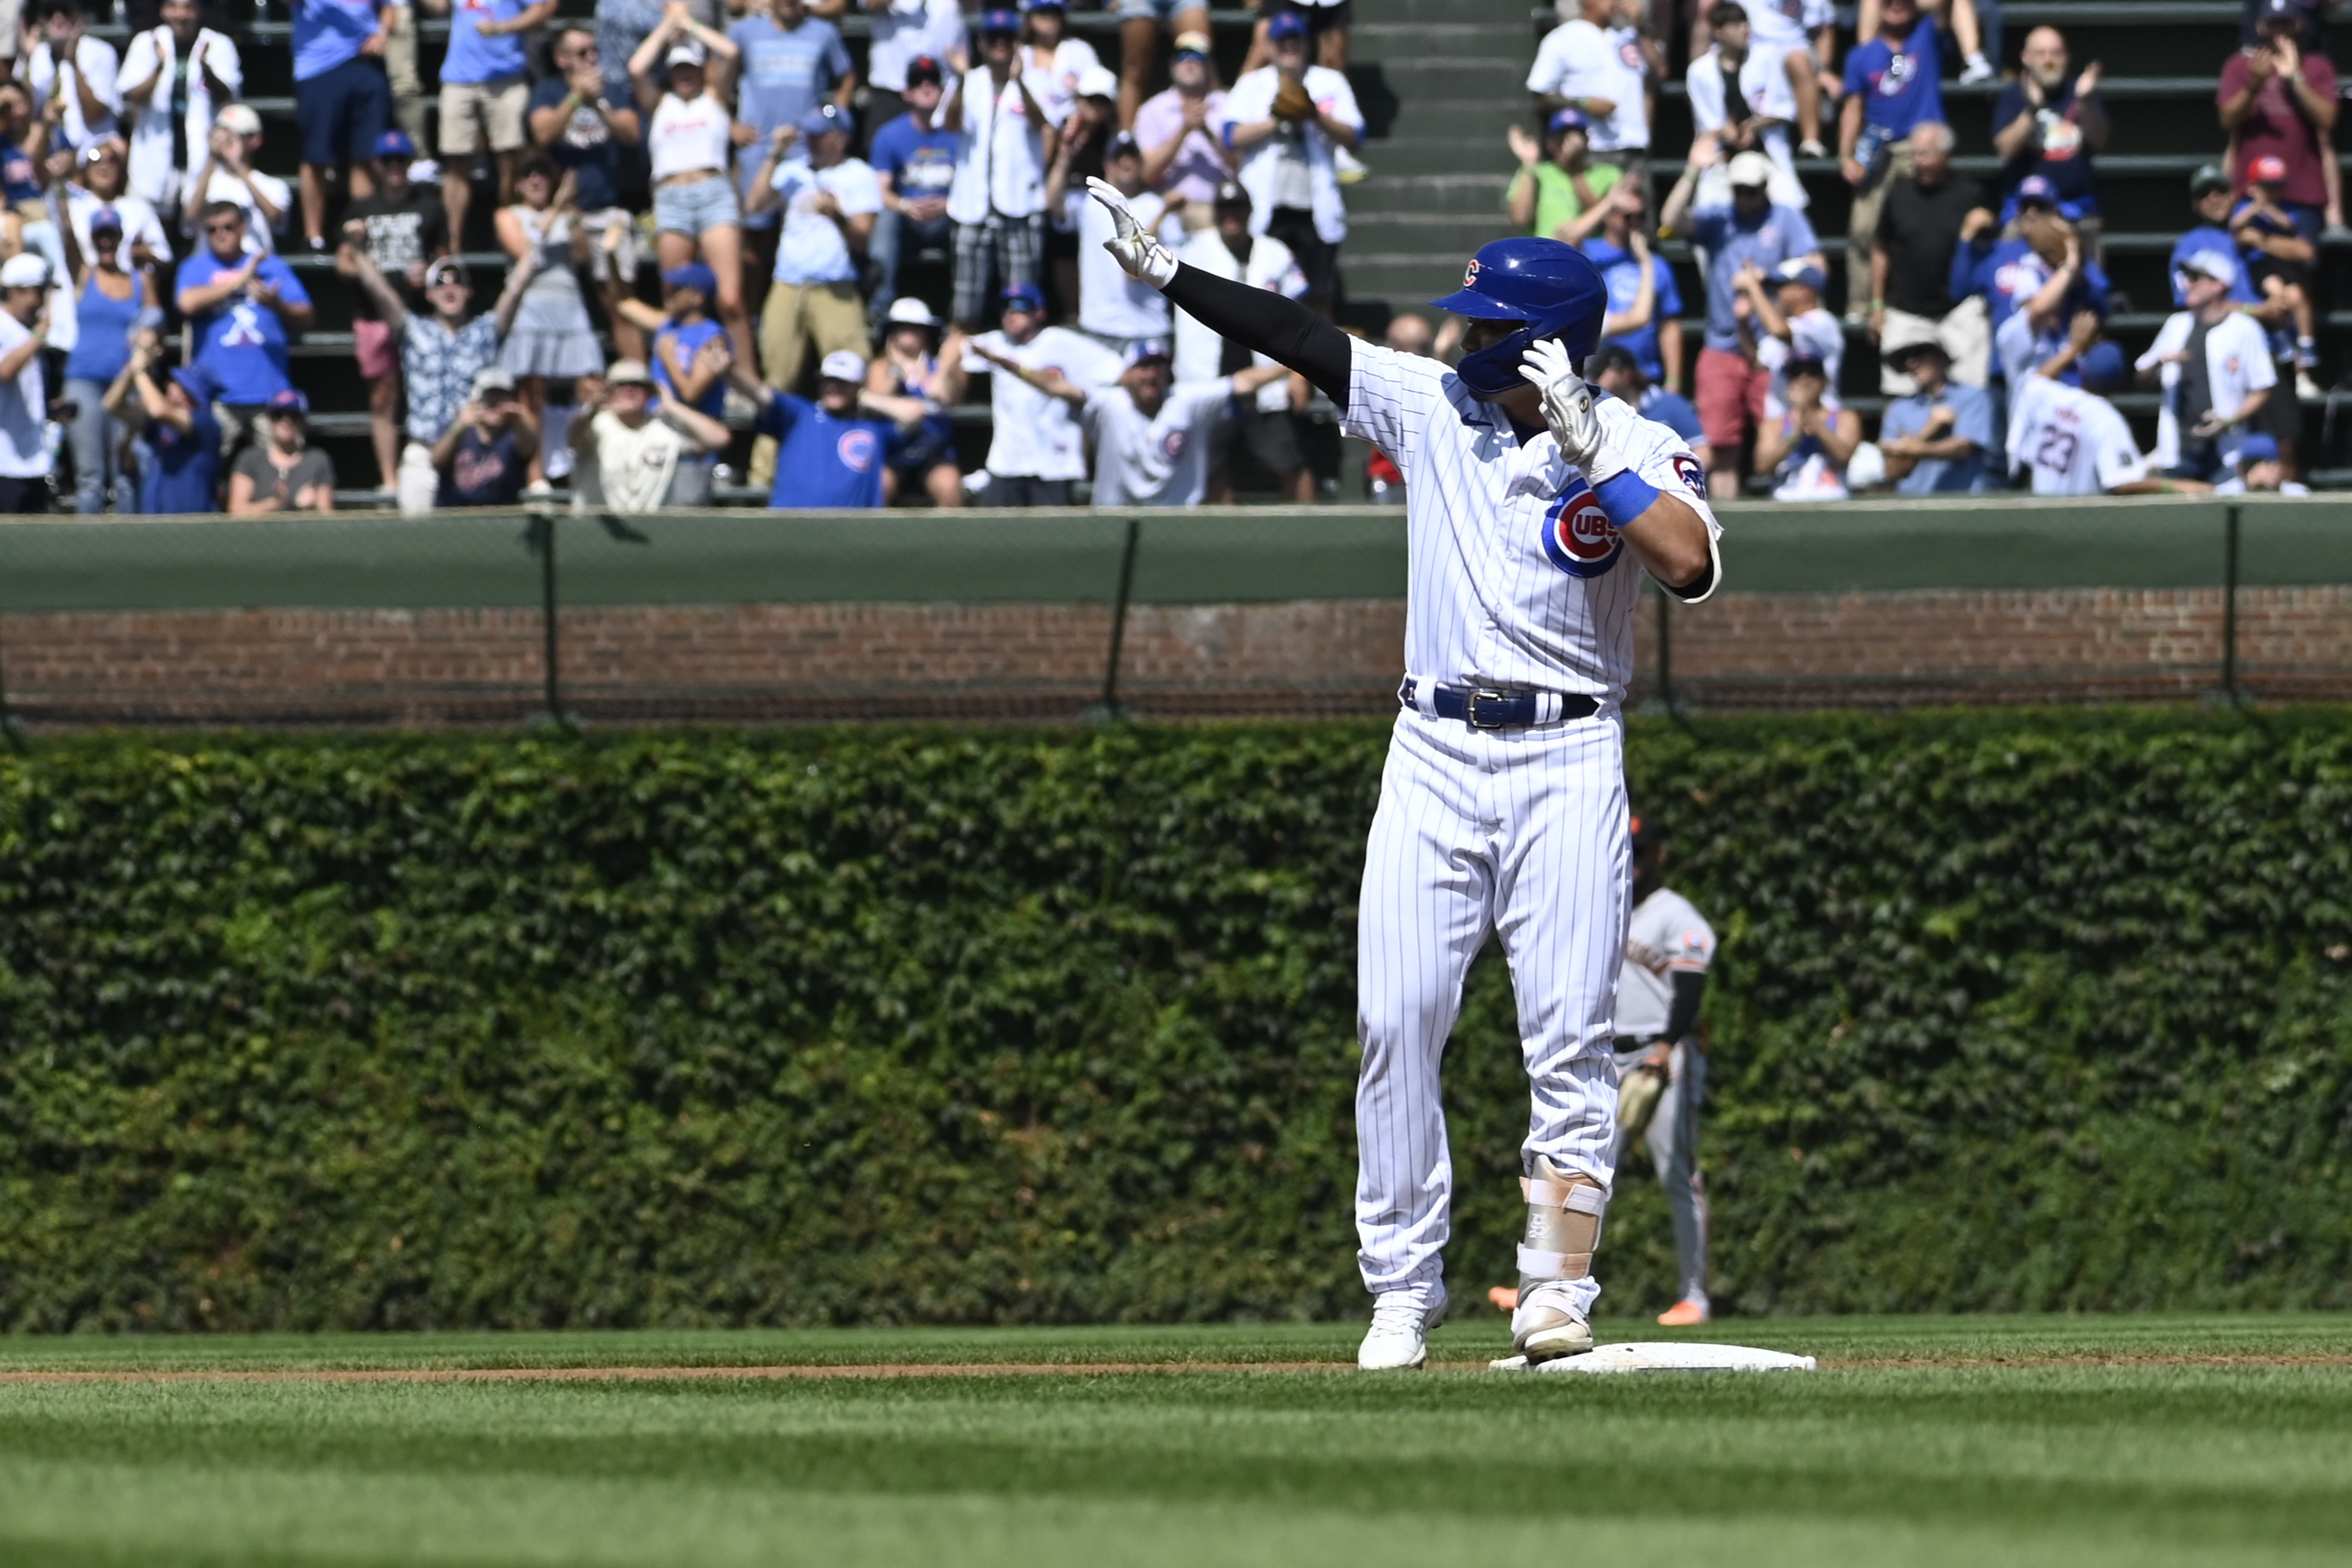 Chicago Cubs sweep San Francisco Giants behind Jordan Wicks' quality start  as younger players help in the postseason hunt